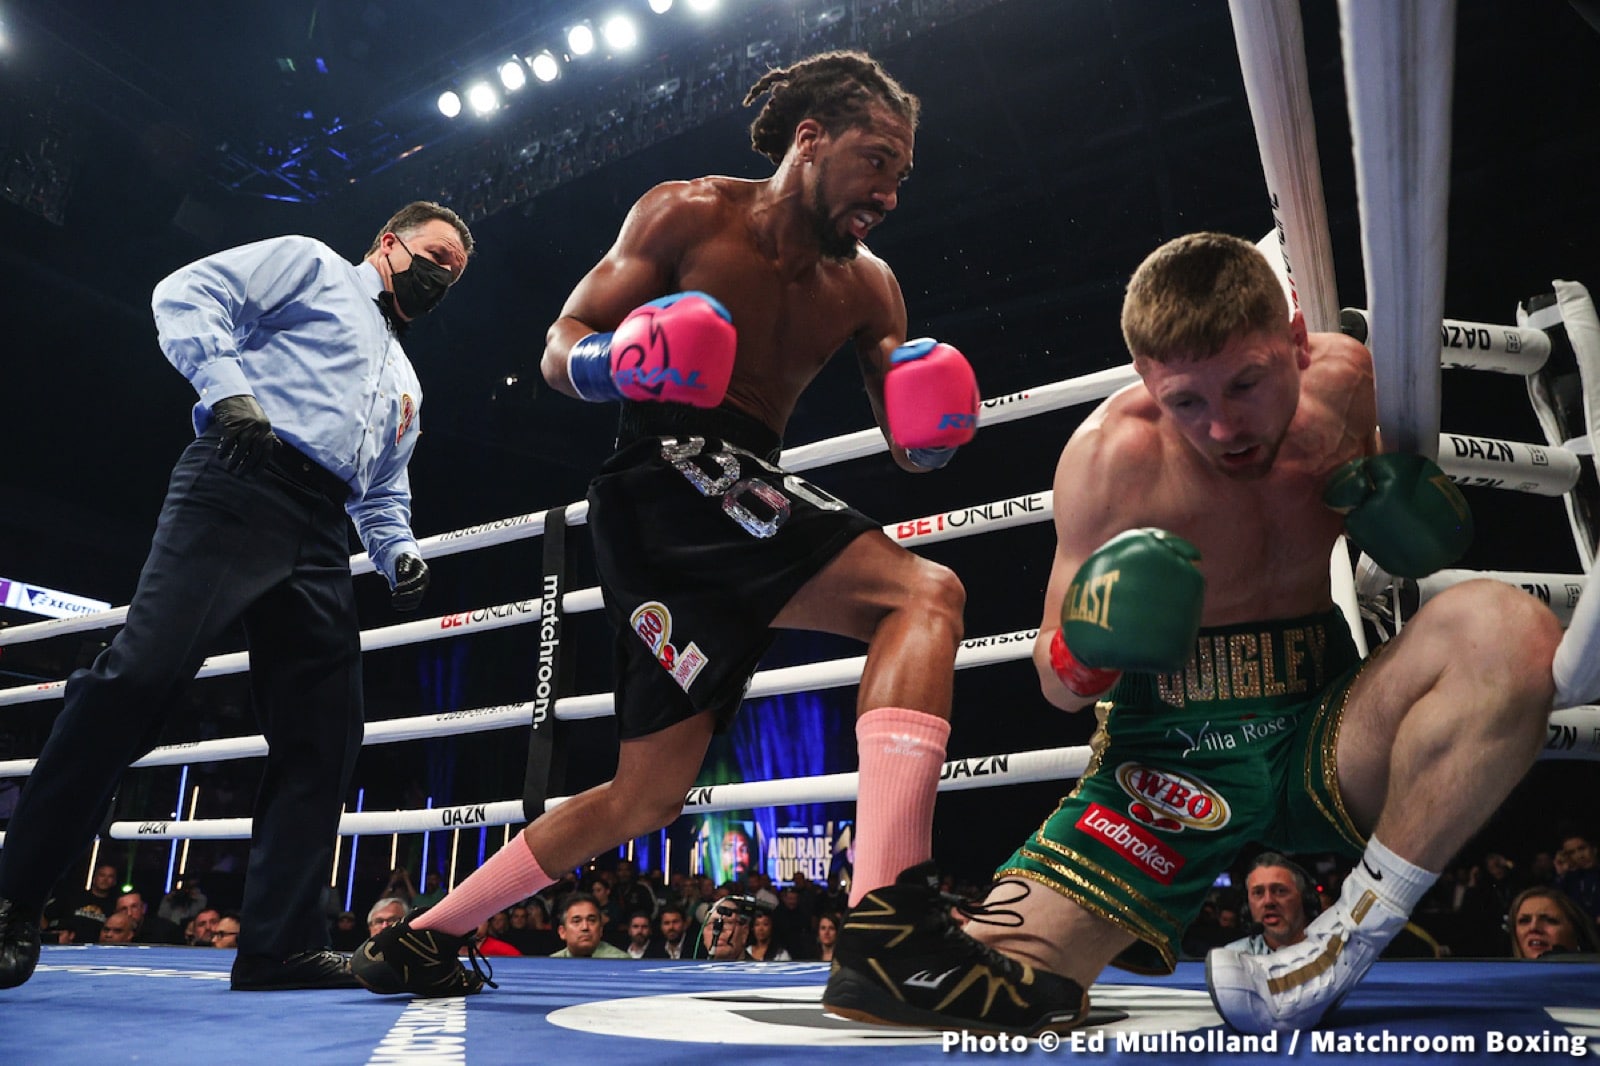 Andrade slaughters Quigley in statement fight - Results